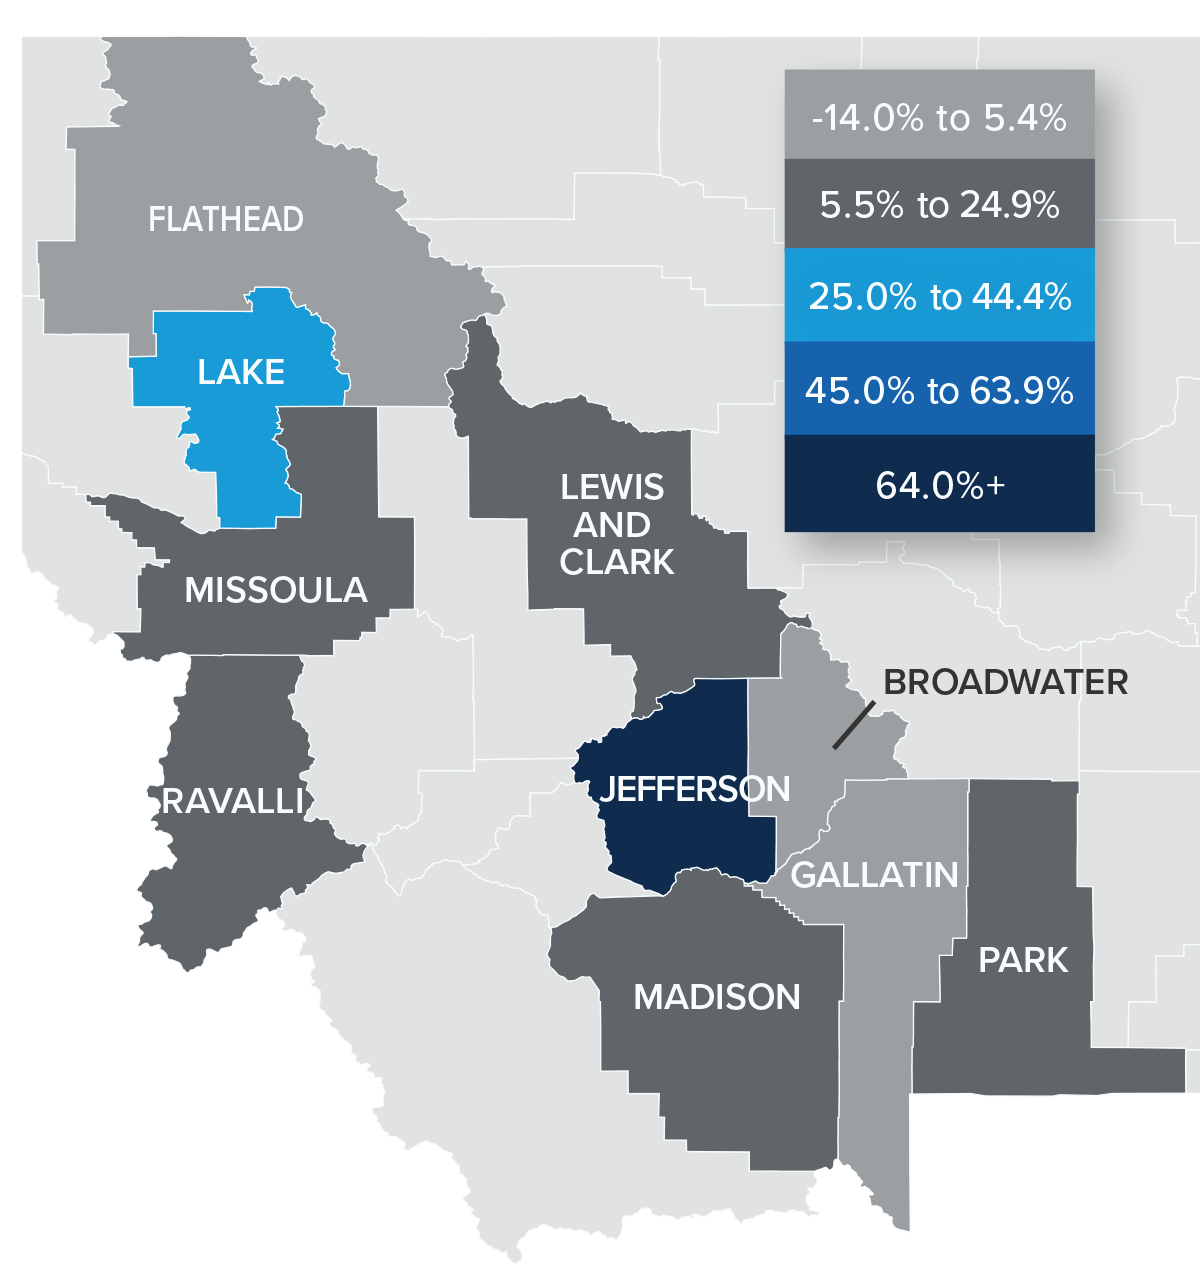 A map showing the real estate home prices percentage changes for various counties in Montana. Different colors correspond to different tiers of percentage change. Flathead, Broadwater, and Gallatin County have a percentage change in the -14% to 5.4% range. Lewis & Clark, Missoula, Ravalli, Madison, and Park are in the 5.5% to 24.9% change range, Lake is in the 35% to 44.4% range, and Jefferson is in the 64%+ range.